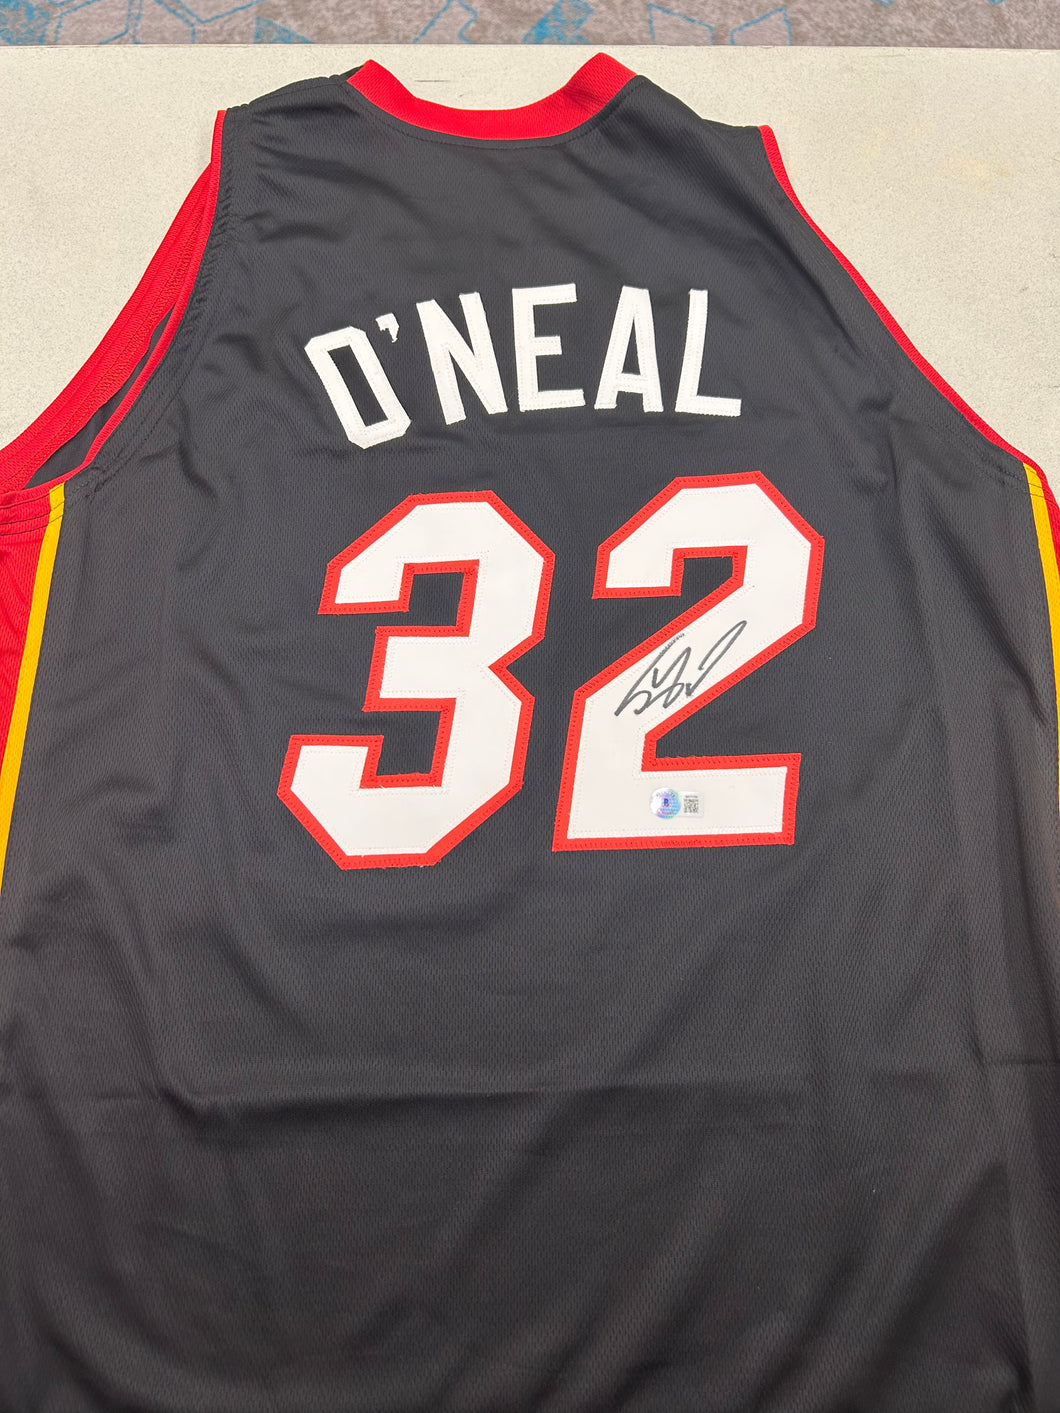 Shaquille O’Neal custom signed heat jersey